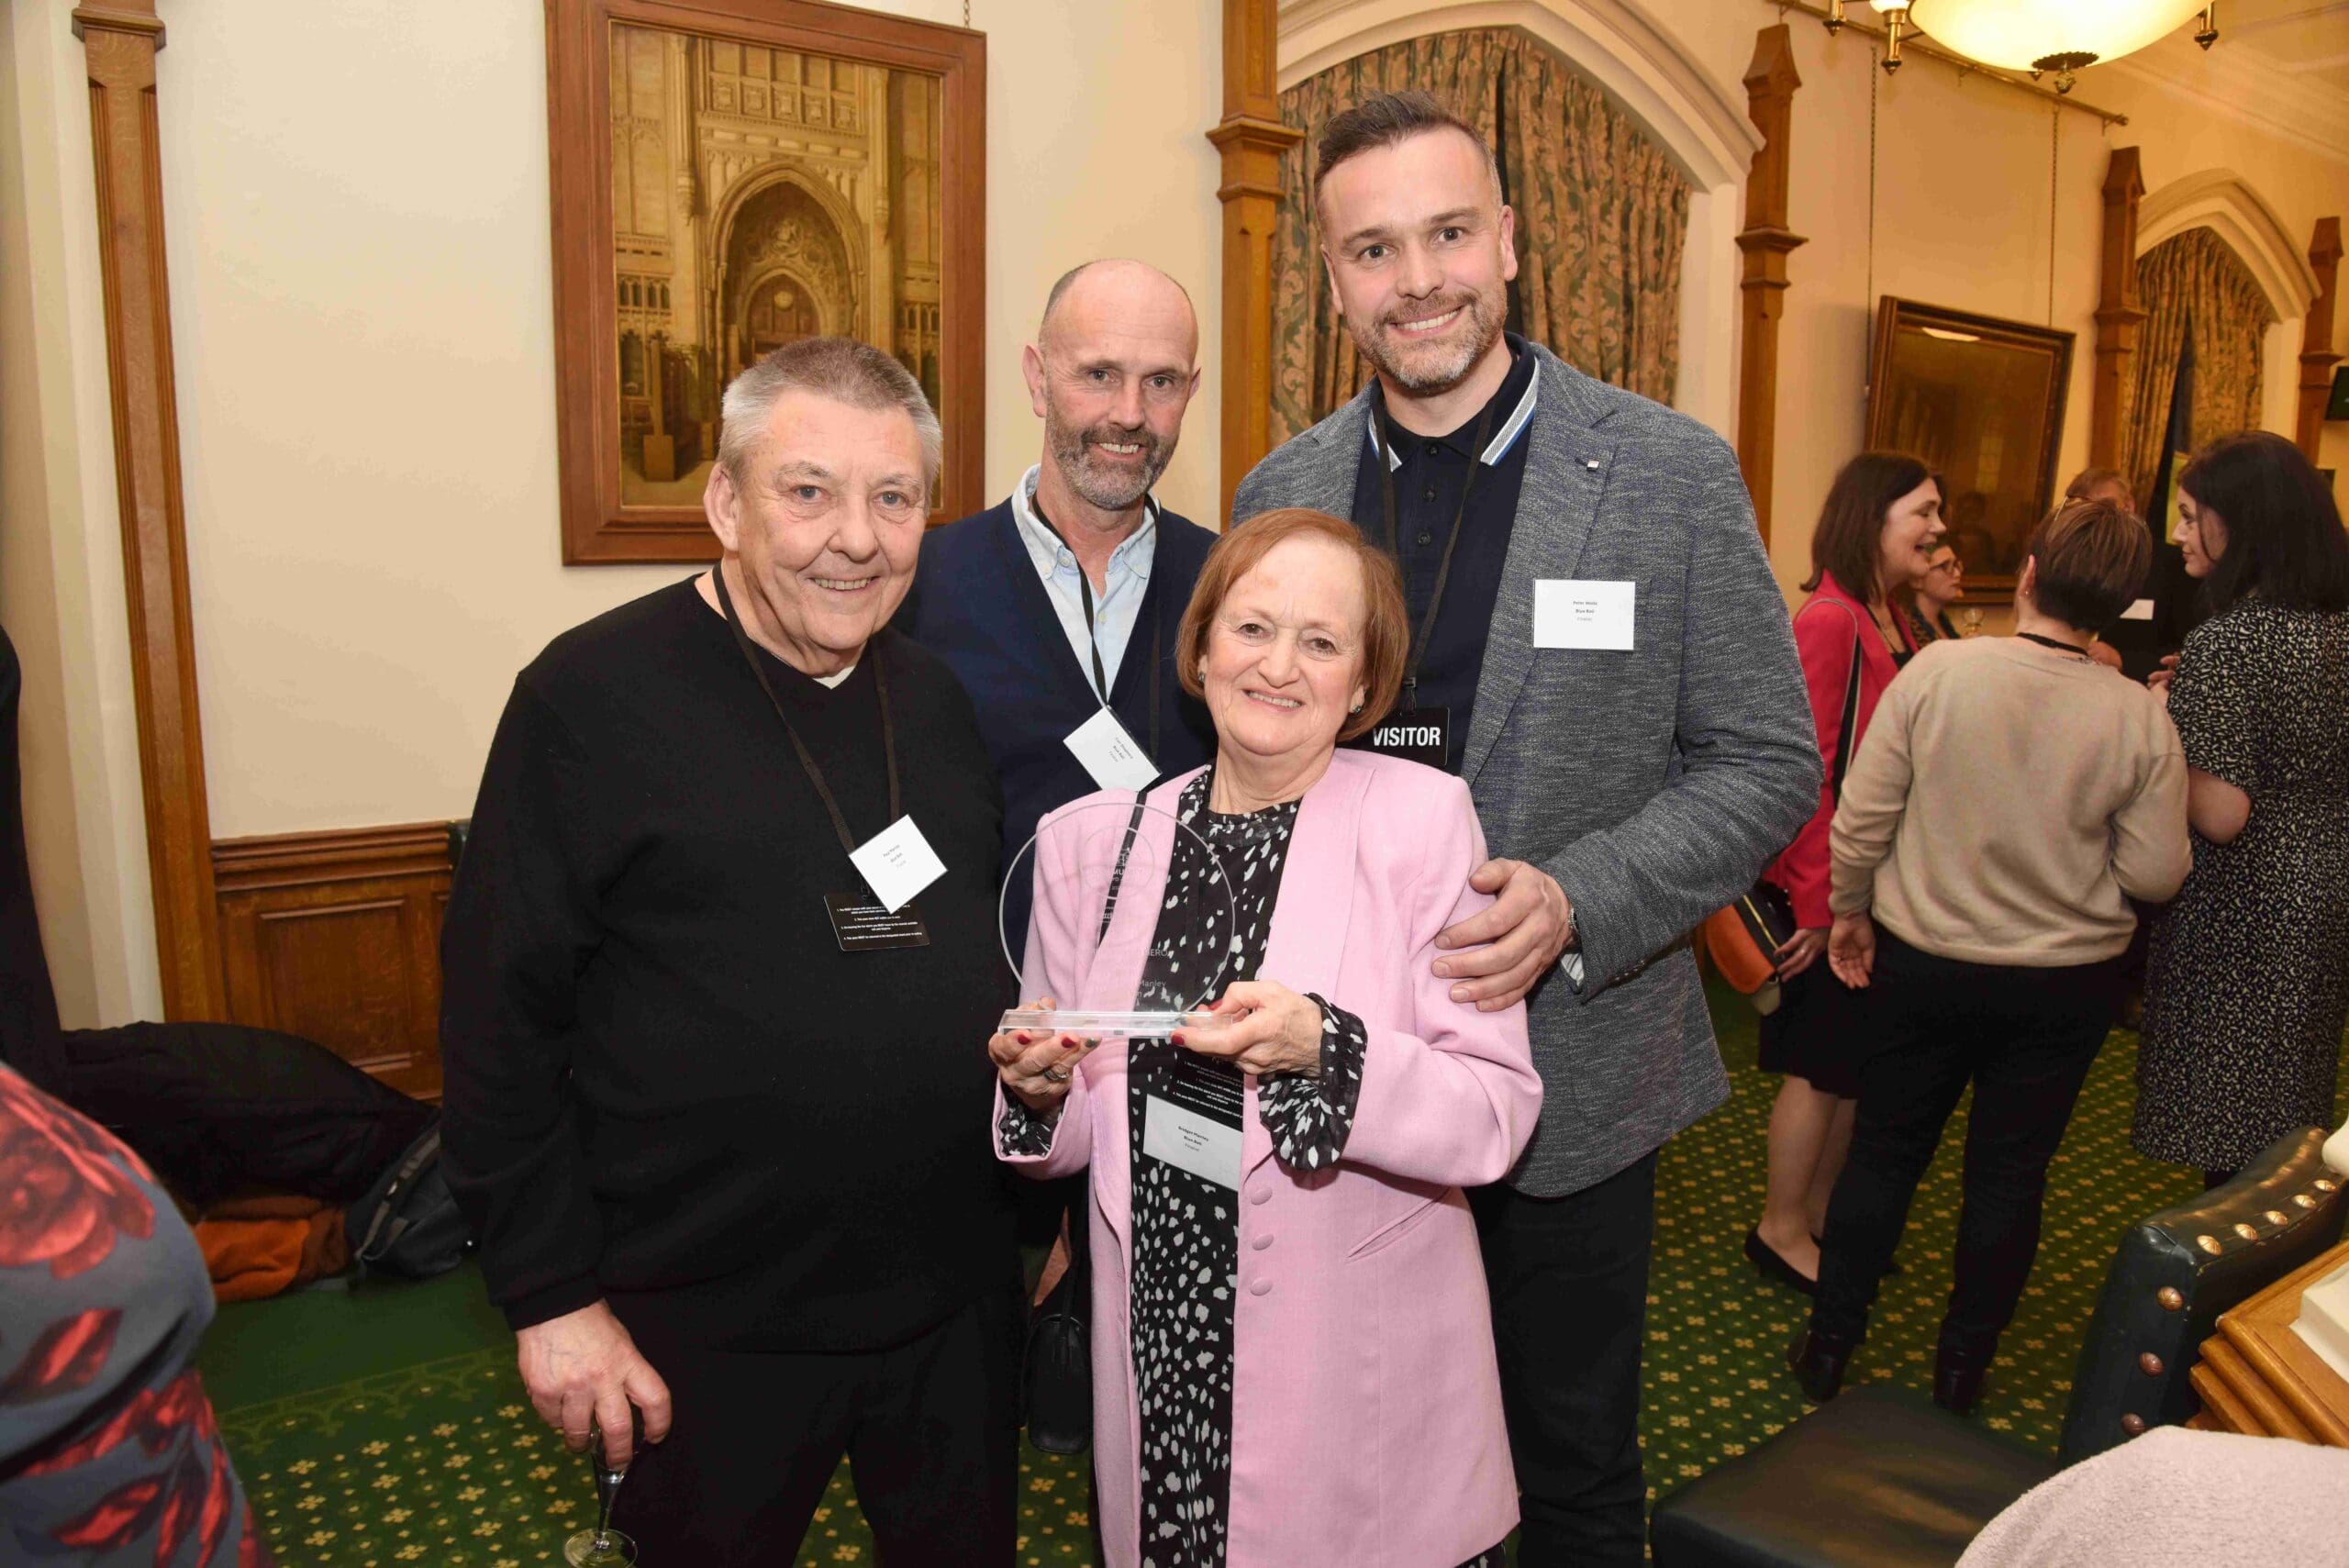 Pubs nationwide honoured in awards hosted at Houses of Parliament